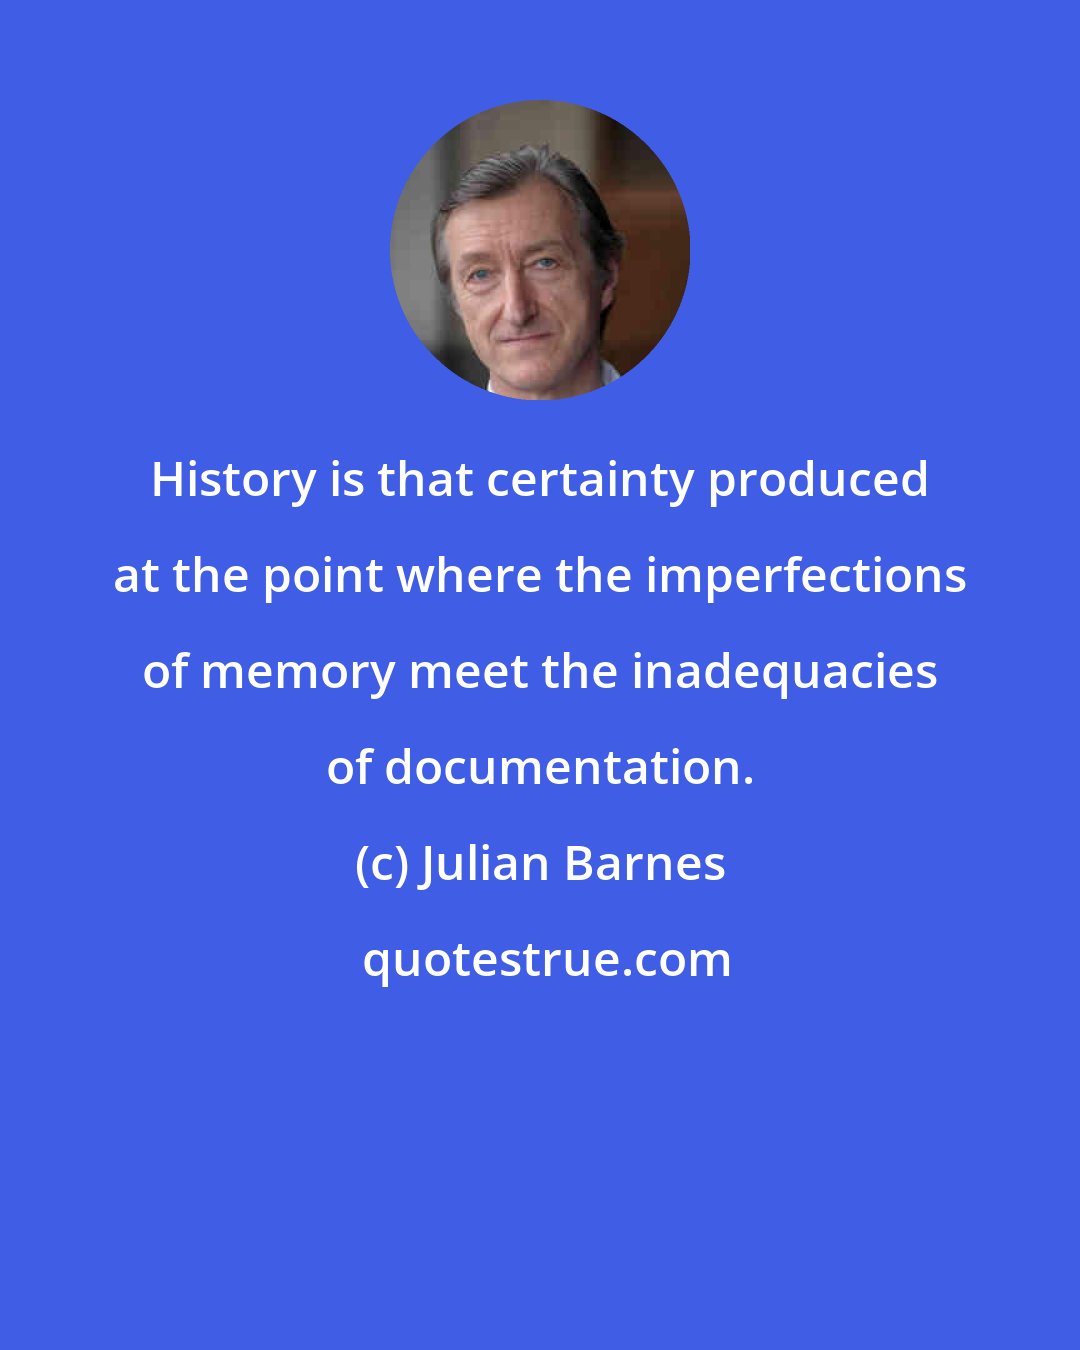 Julian Barnes: History is that certainty produced at the point where the imperfections of memory meet the inadequacies of documentation.